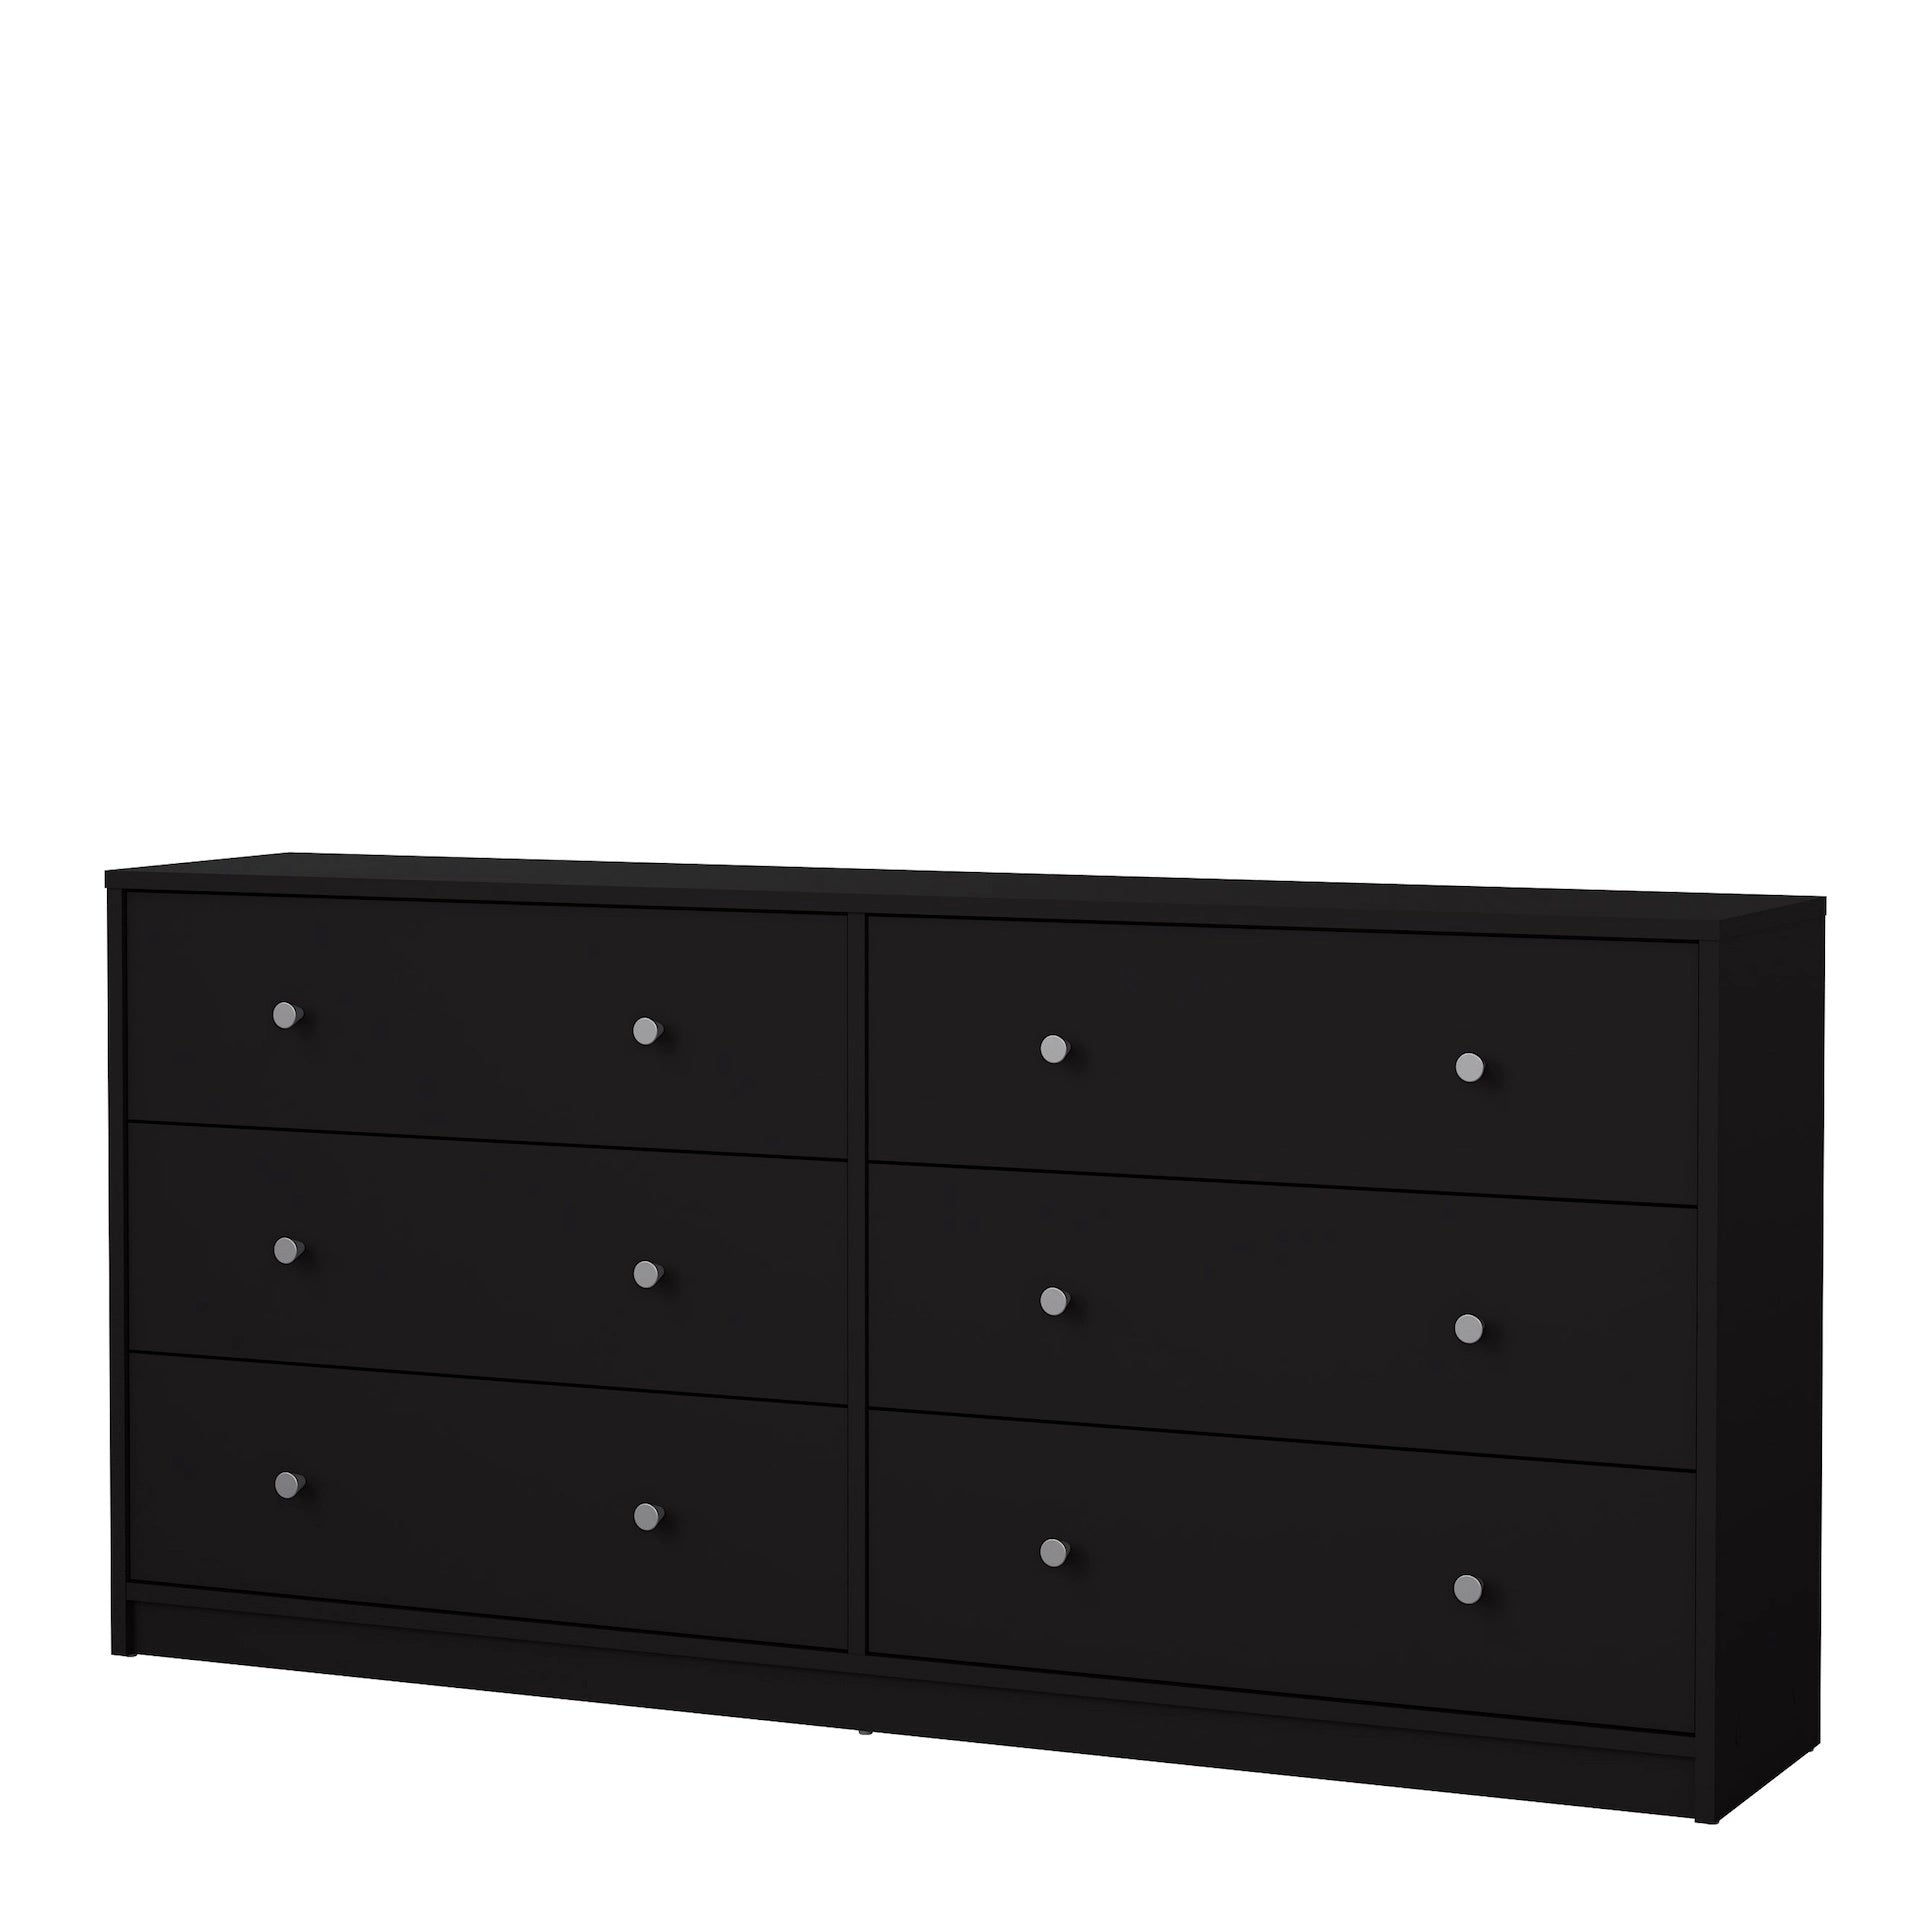 Furniture To Go May Chest of 6 Drawers (3+3) in Black